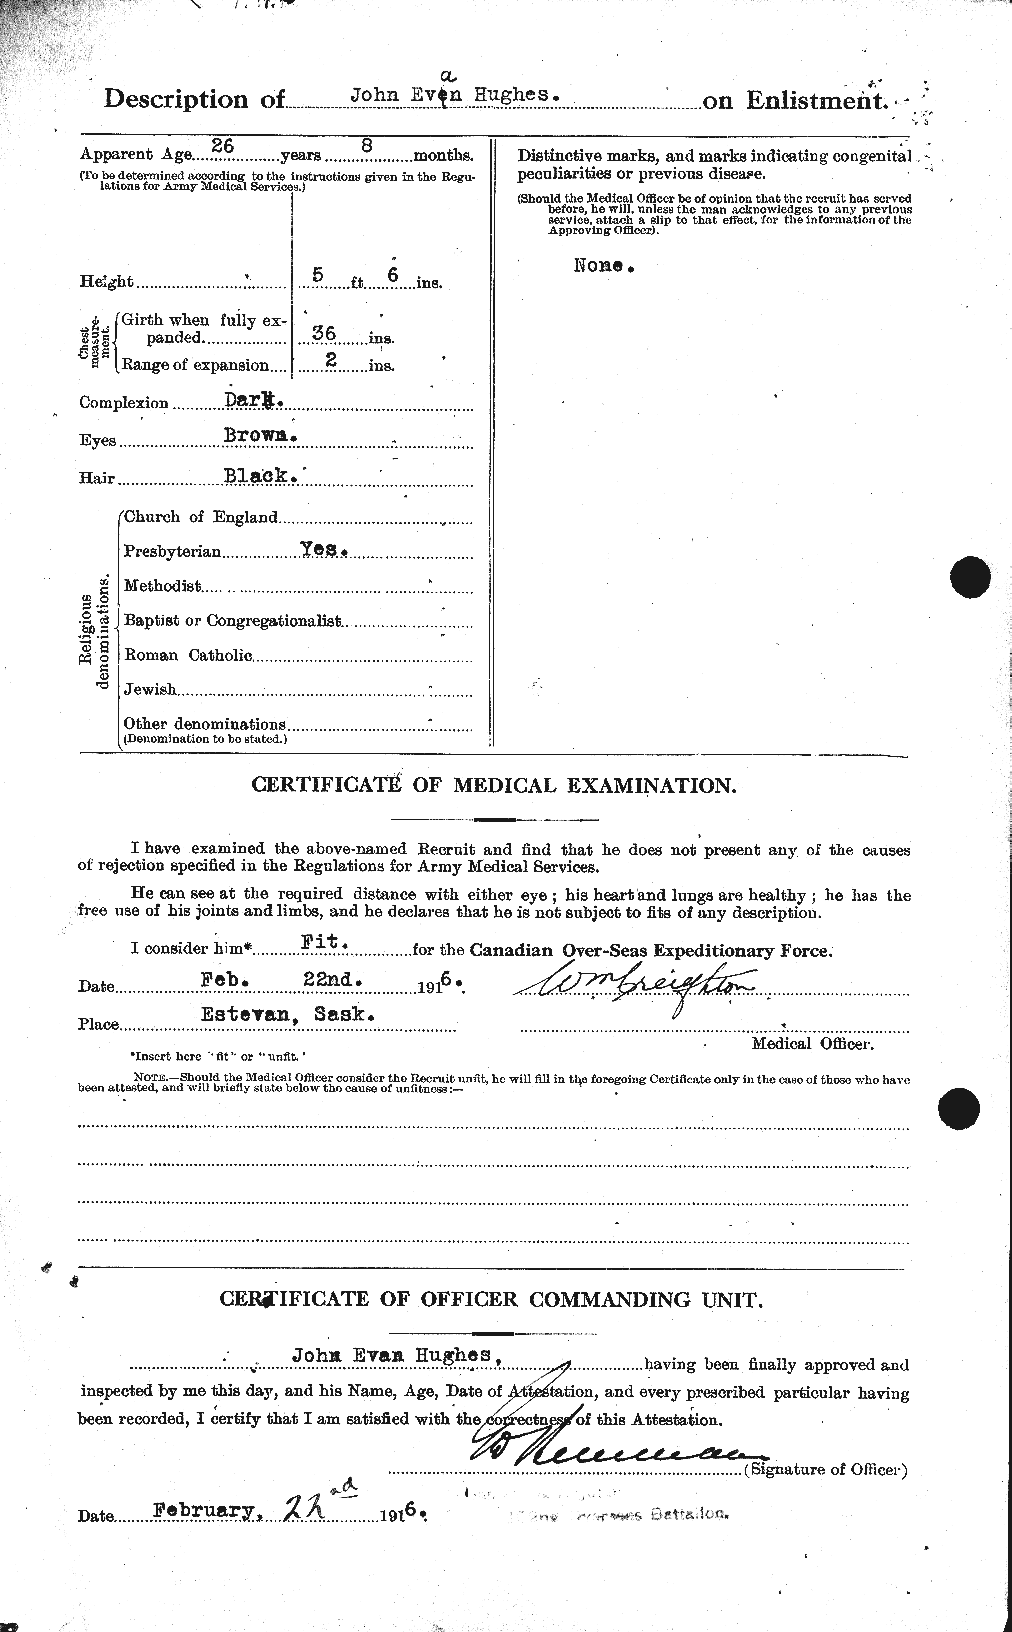 Personnel Records of the First World War - CEF 404015b